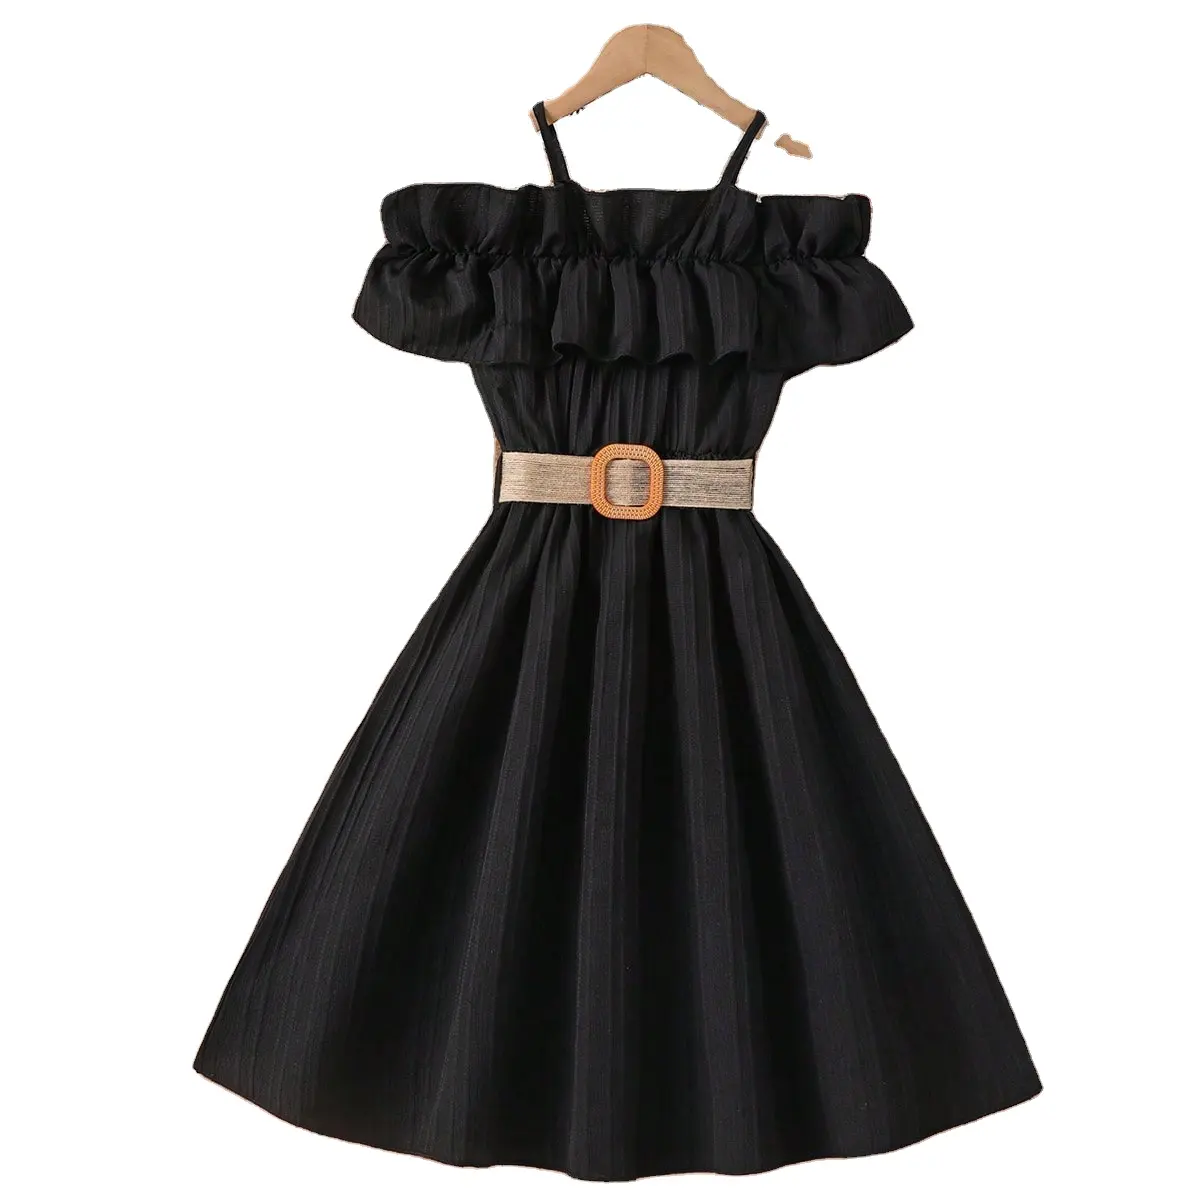 European style one shoulder strap dress for girls of 10 year old fashion girls birthday dresses summer dress child girl party